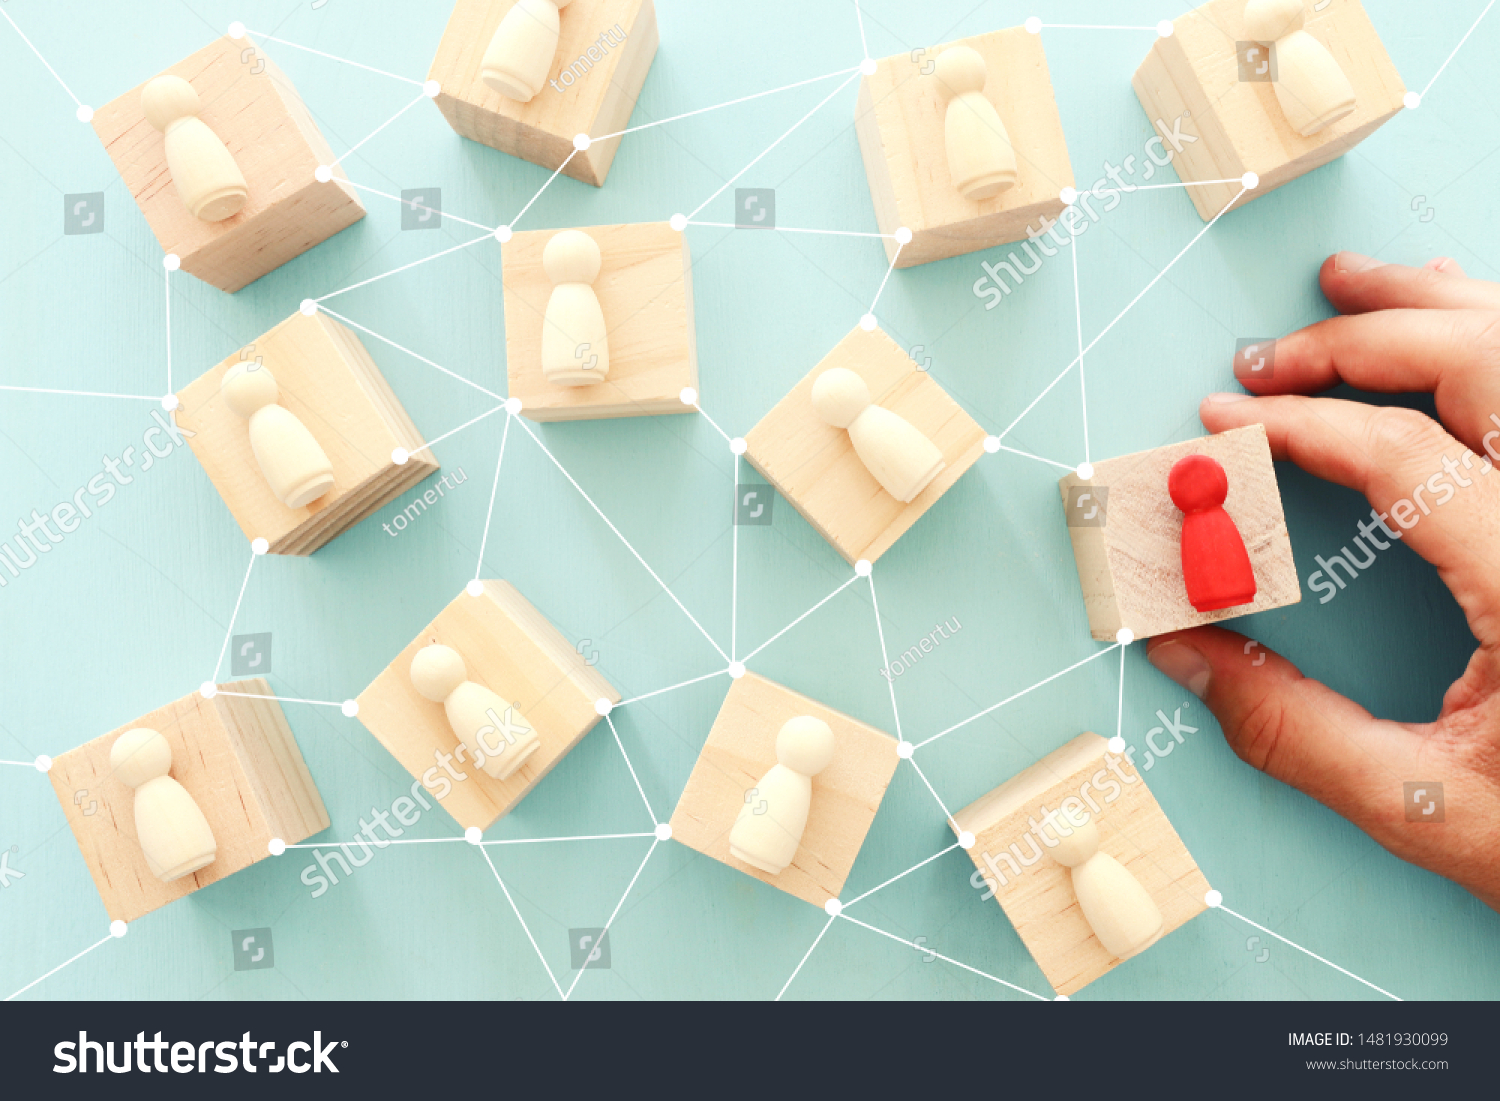 business concept image of people figures over wooden table, human resources and management concept #1481930099